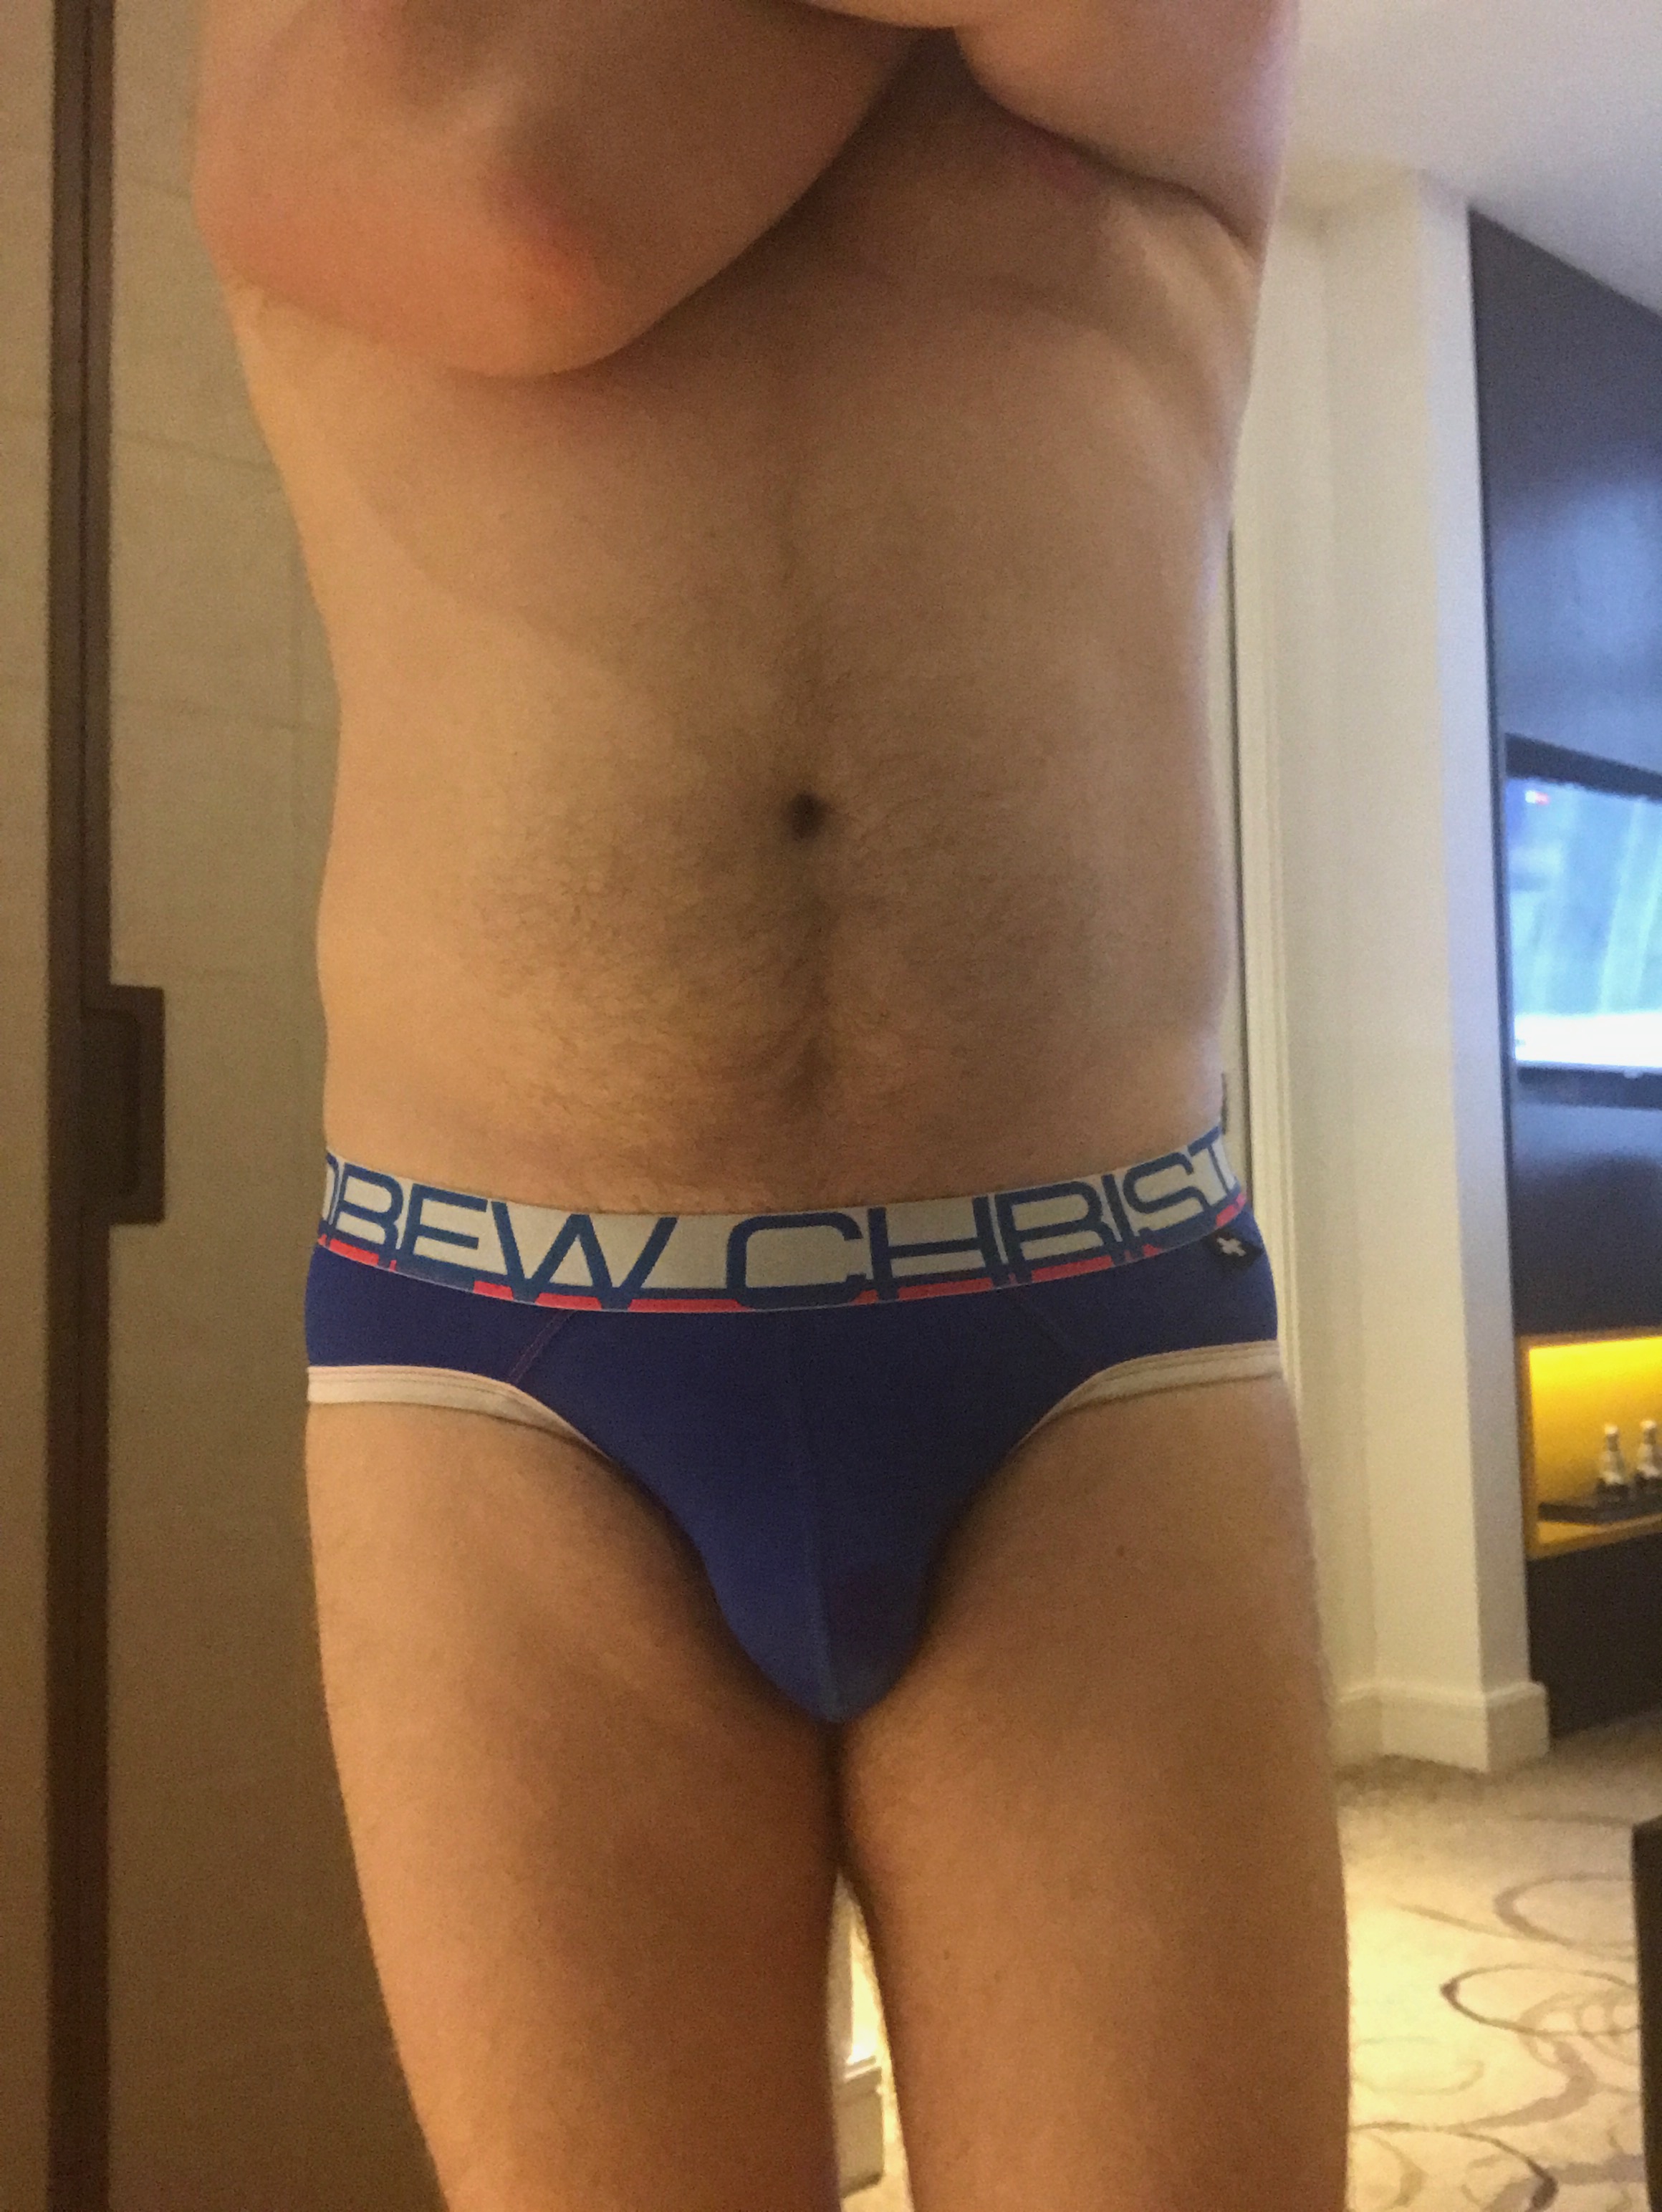 Rugby Briefs for the win today…go sports!